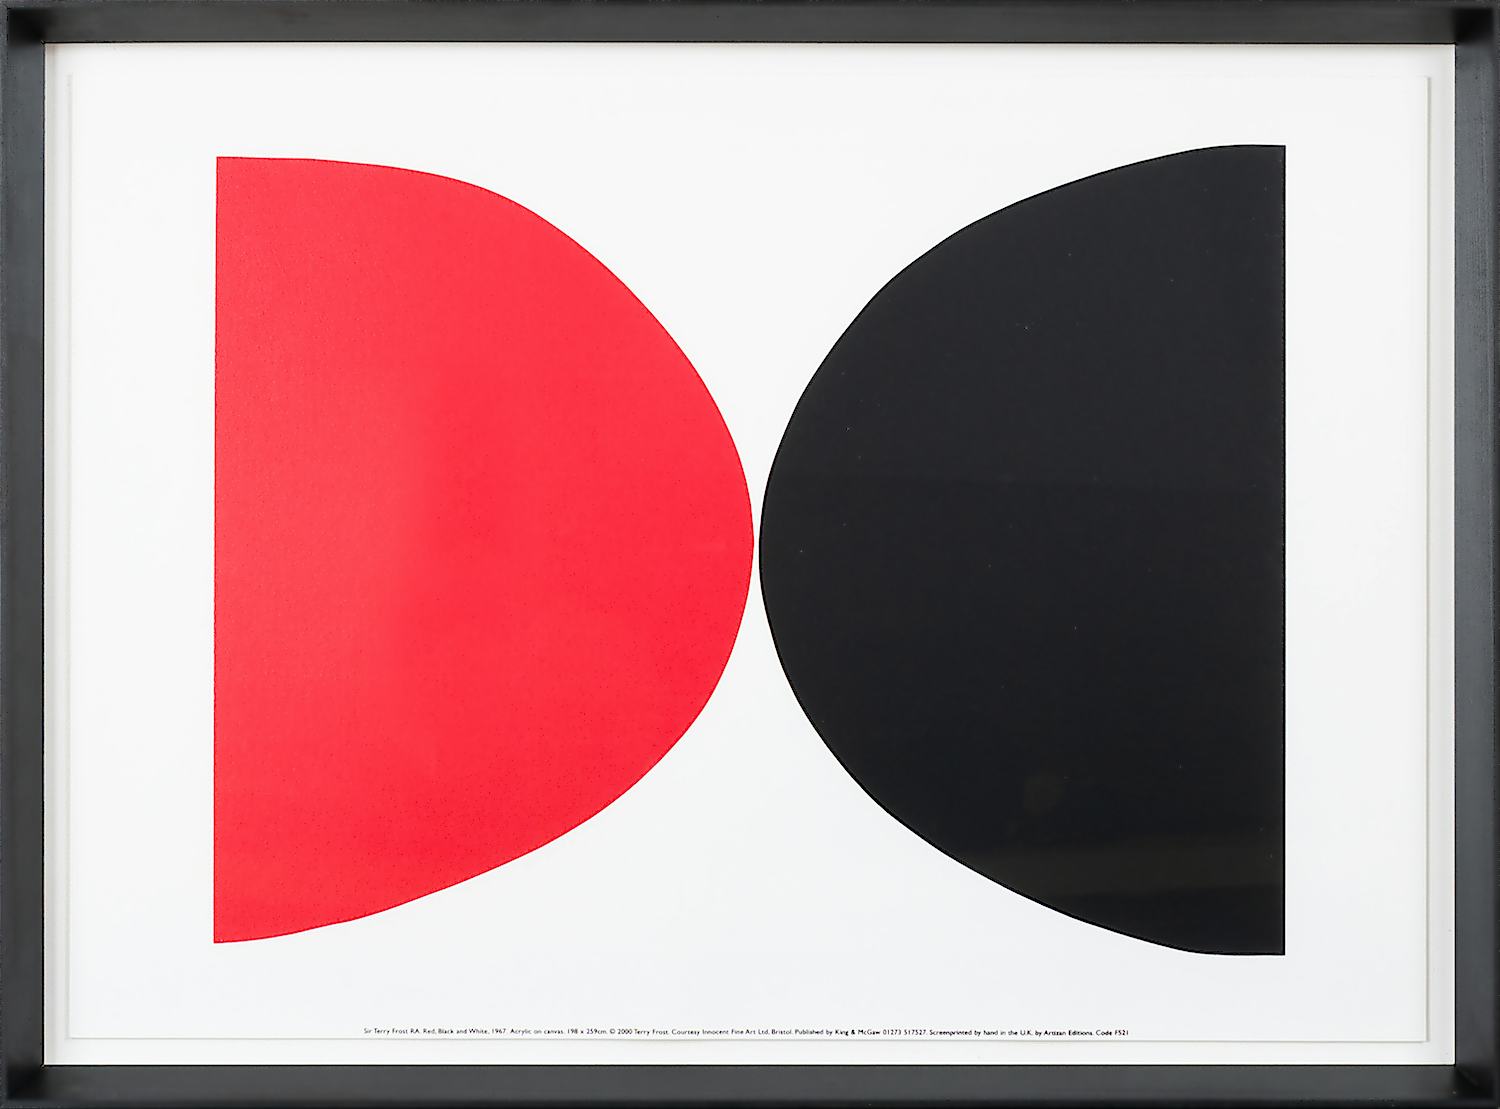 Red, Black and White, 1967 by Terry Frost